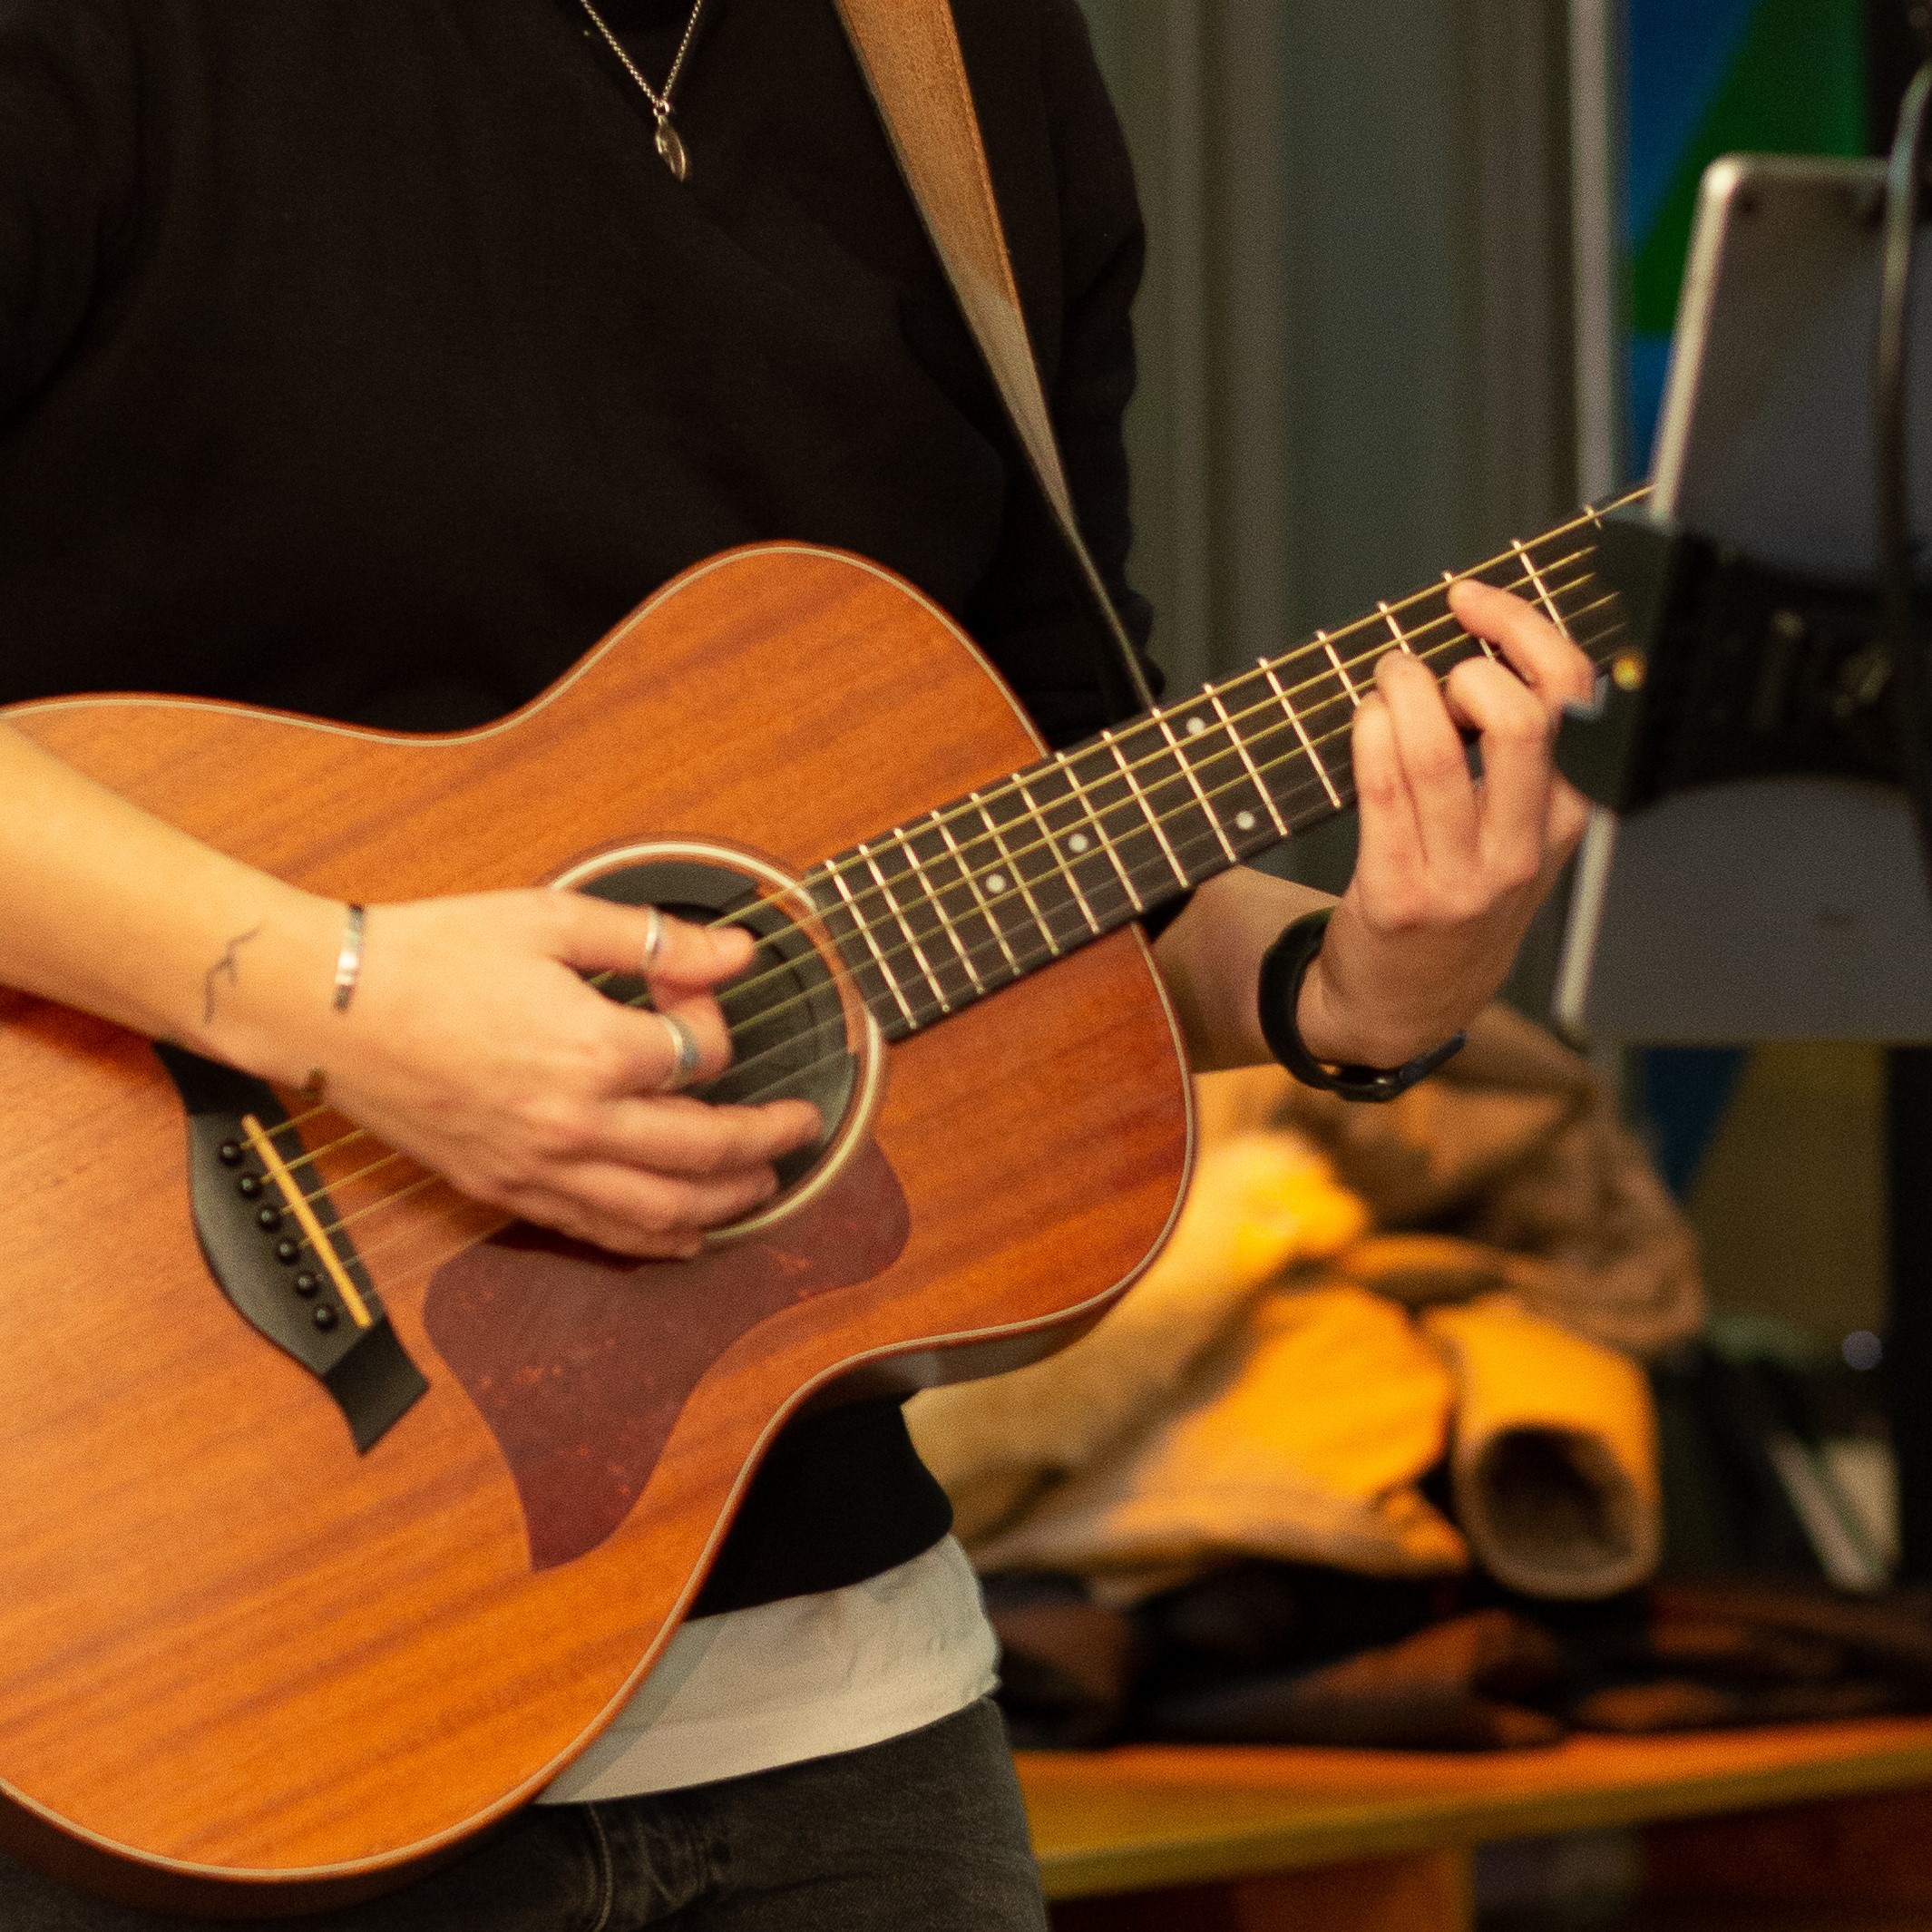 A hand strumming on a acoustic guitar.